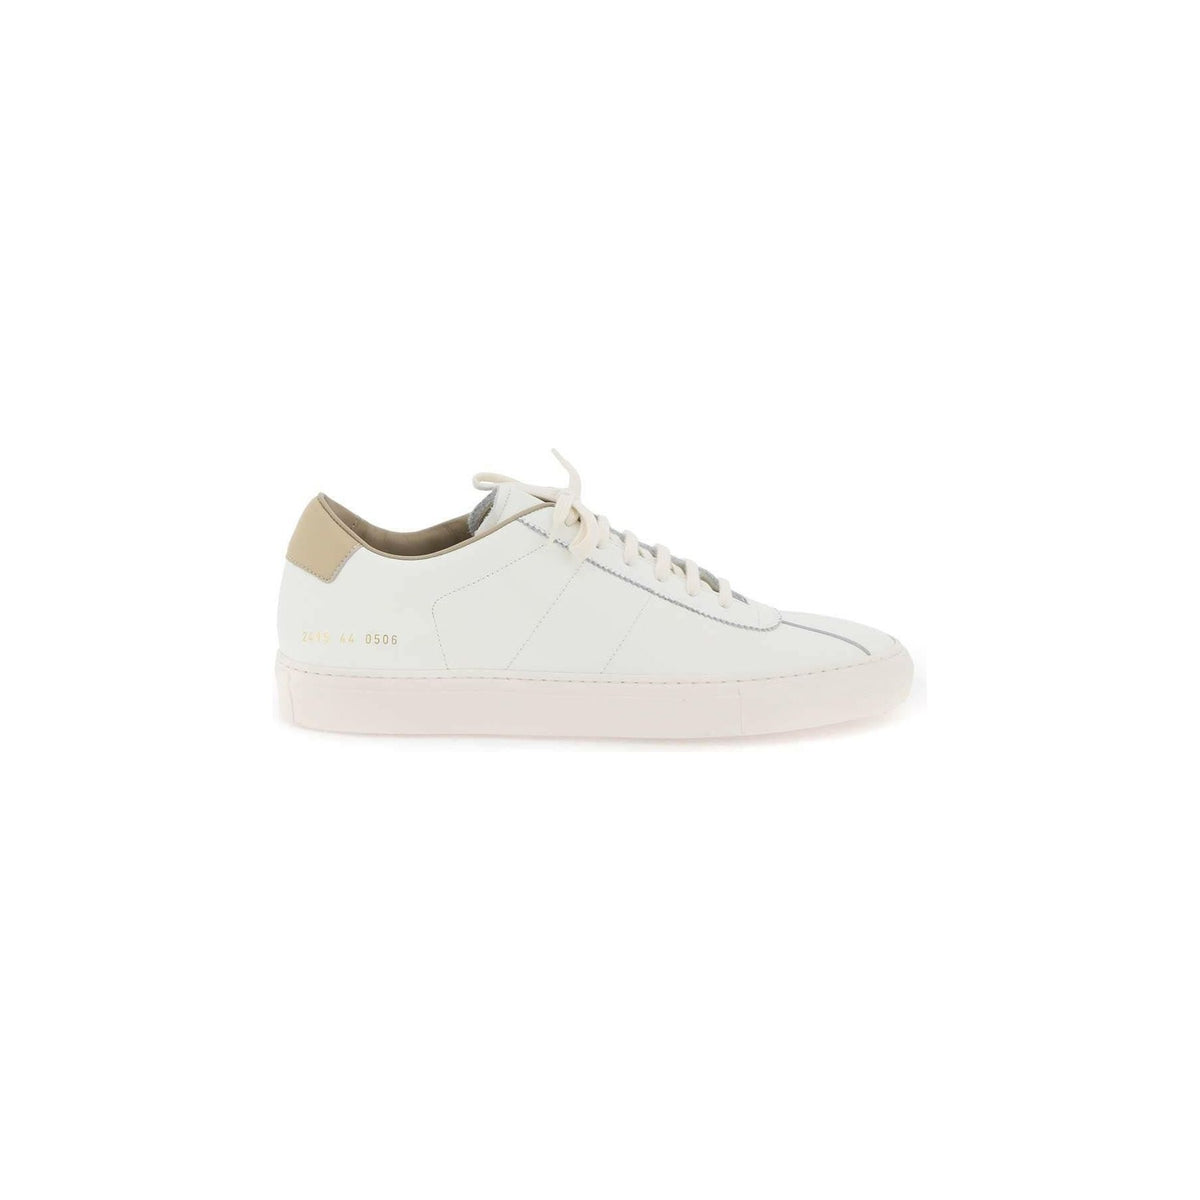 White 70's Tennis Smooth Leather Sneakers COMMON PROJECTS JOHN JULIA.